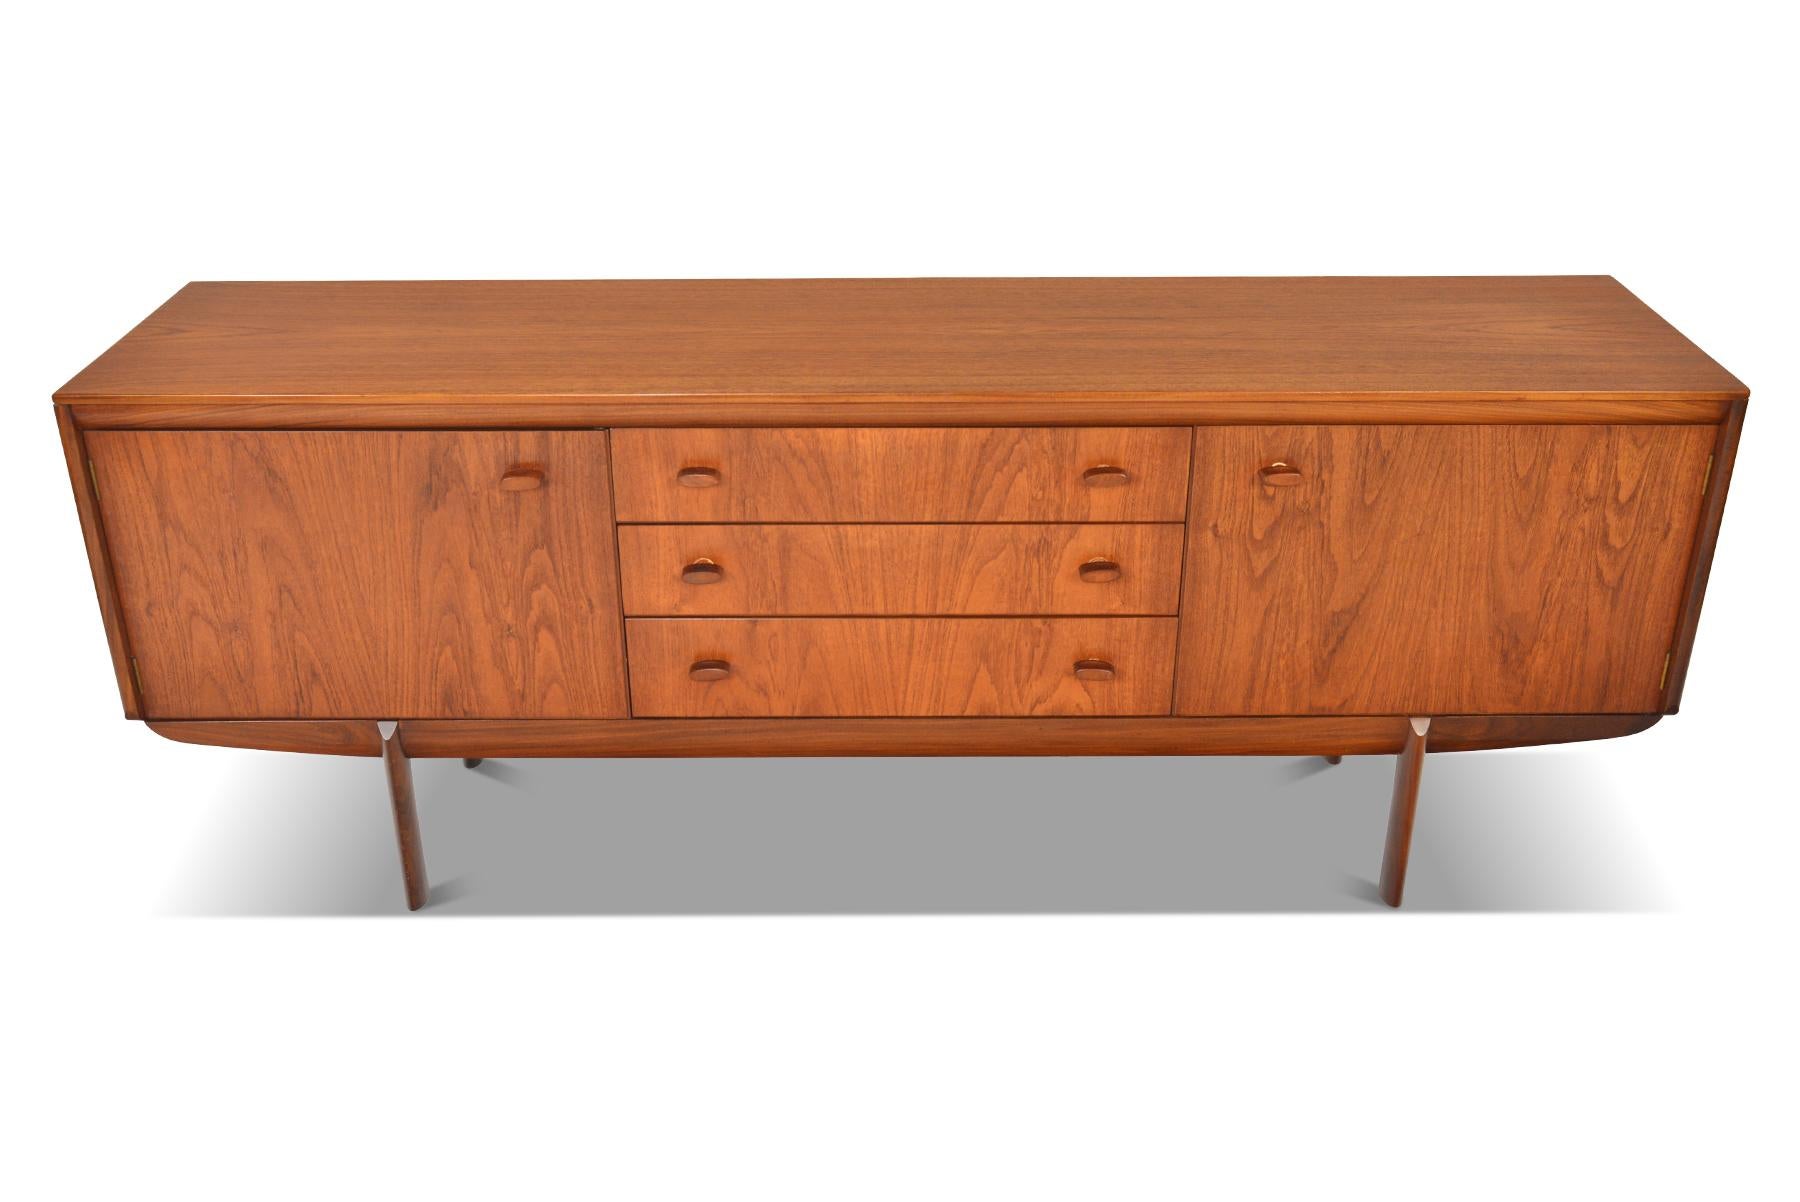 English Modern Teak Credenza by White + Newton In Excellent Condition For Sale In Berkeley, CA